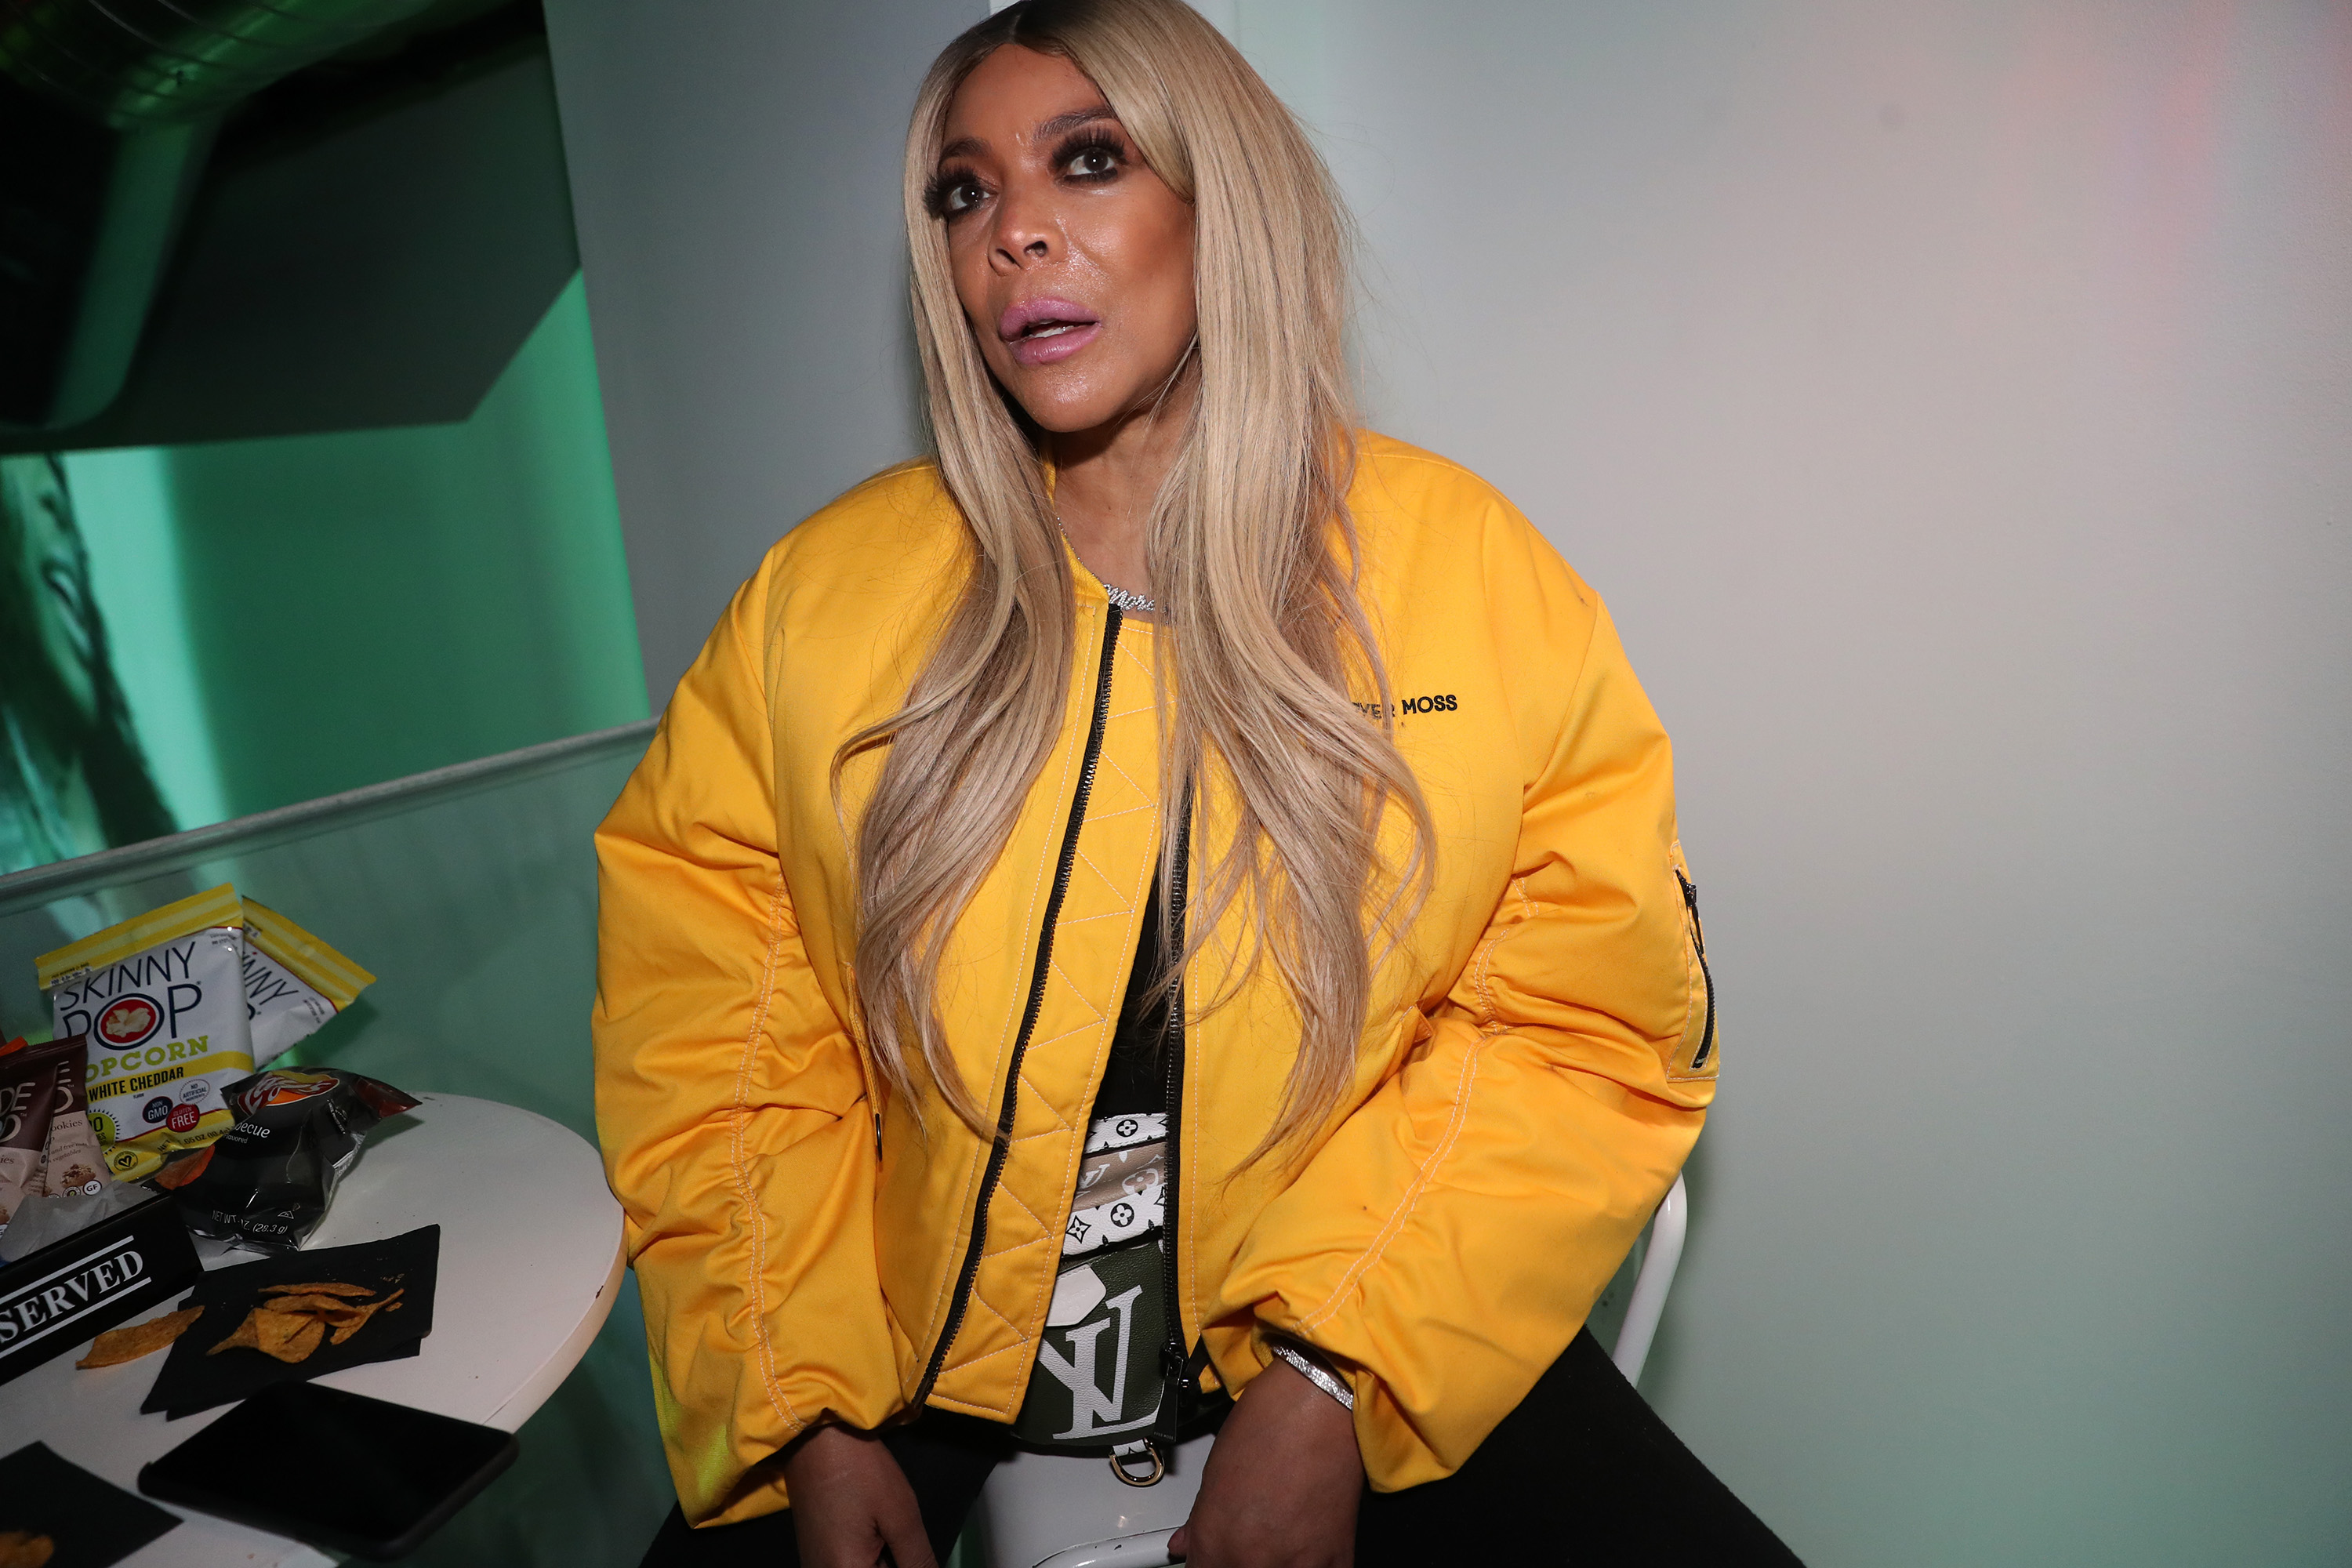 Wendy Williams at the documentary screening of "New Cash Order" in New York City on February 20, 2020 | Source: Getty Images